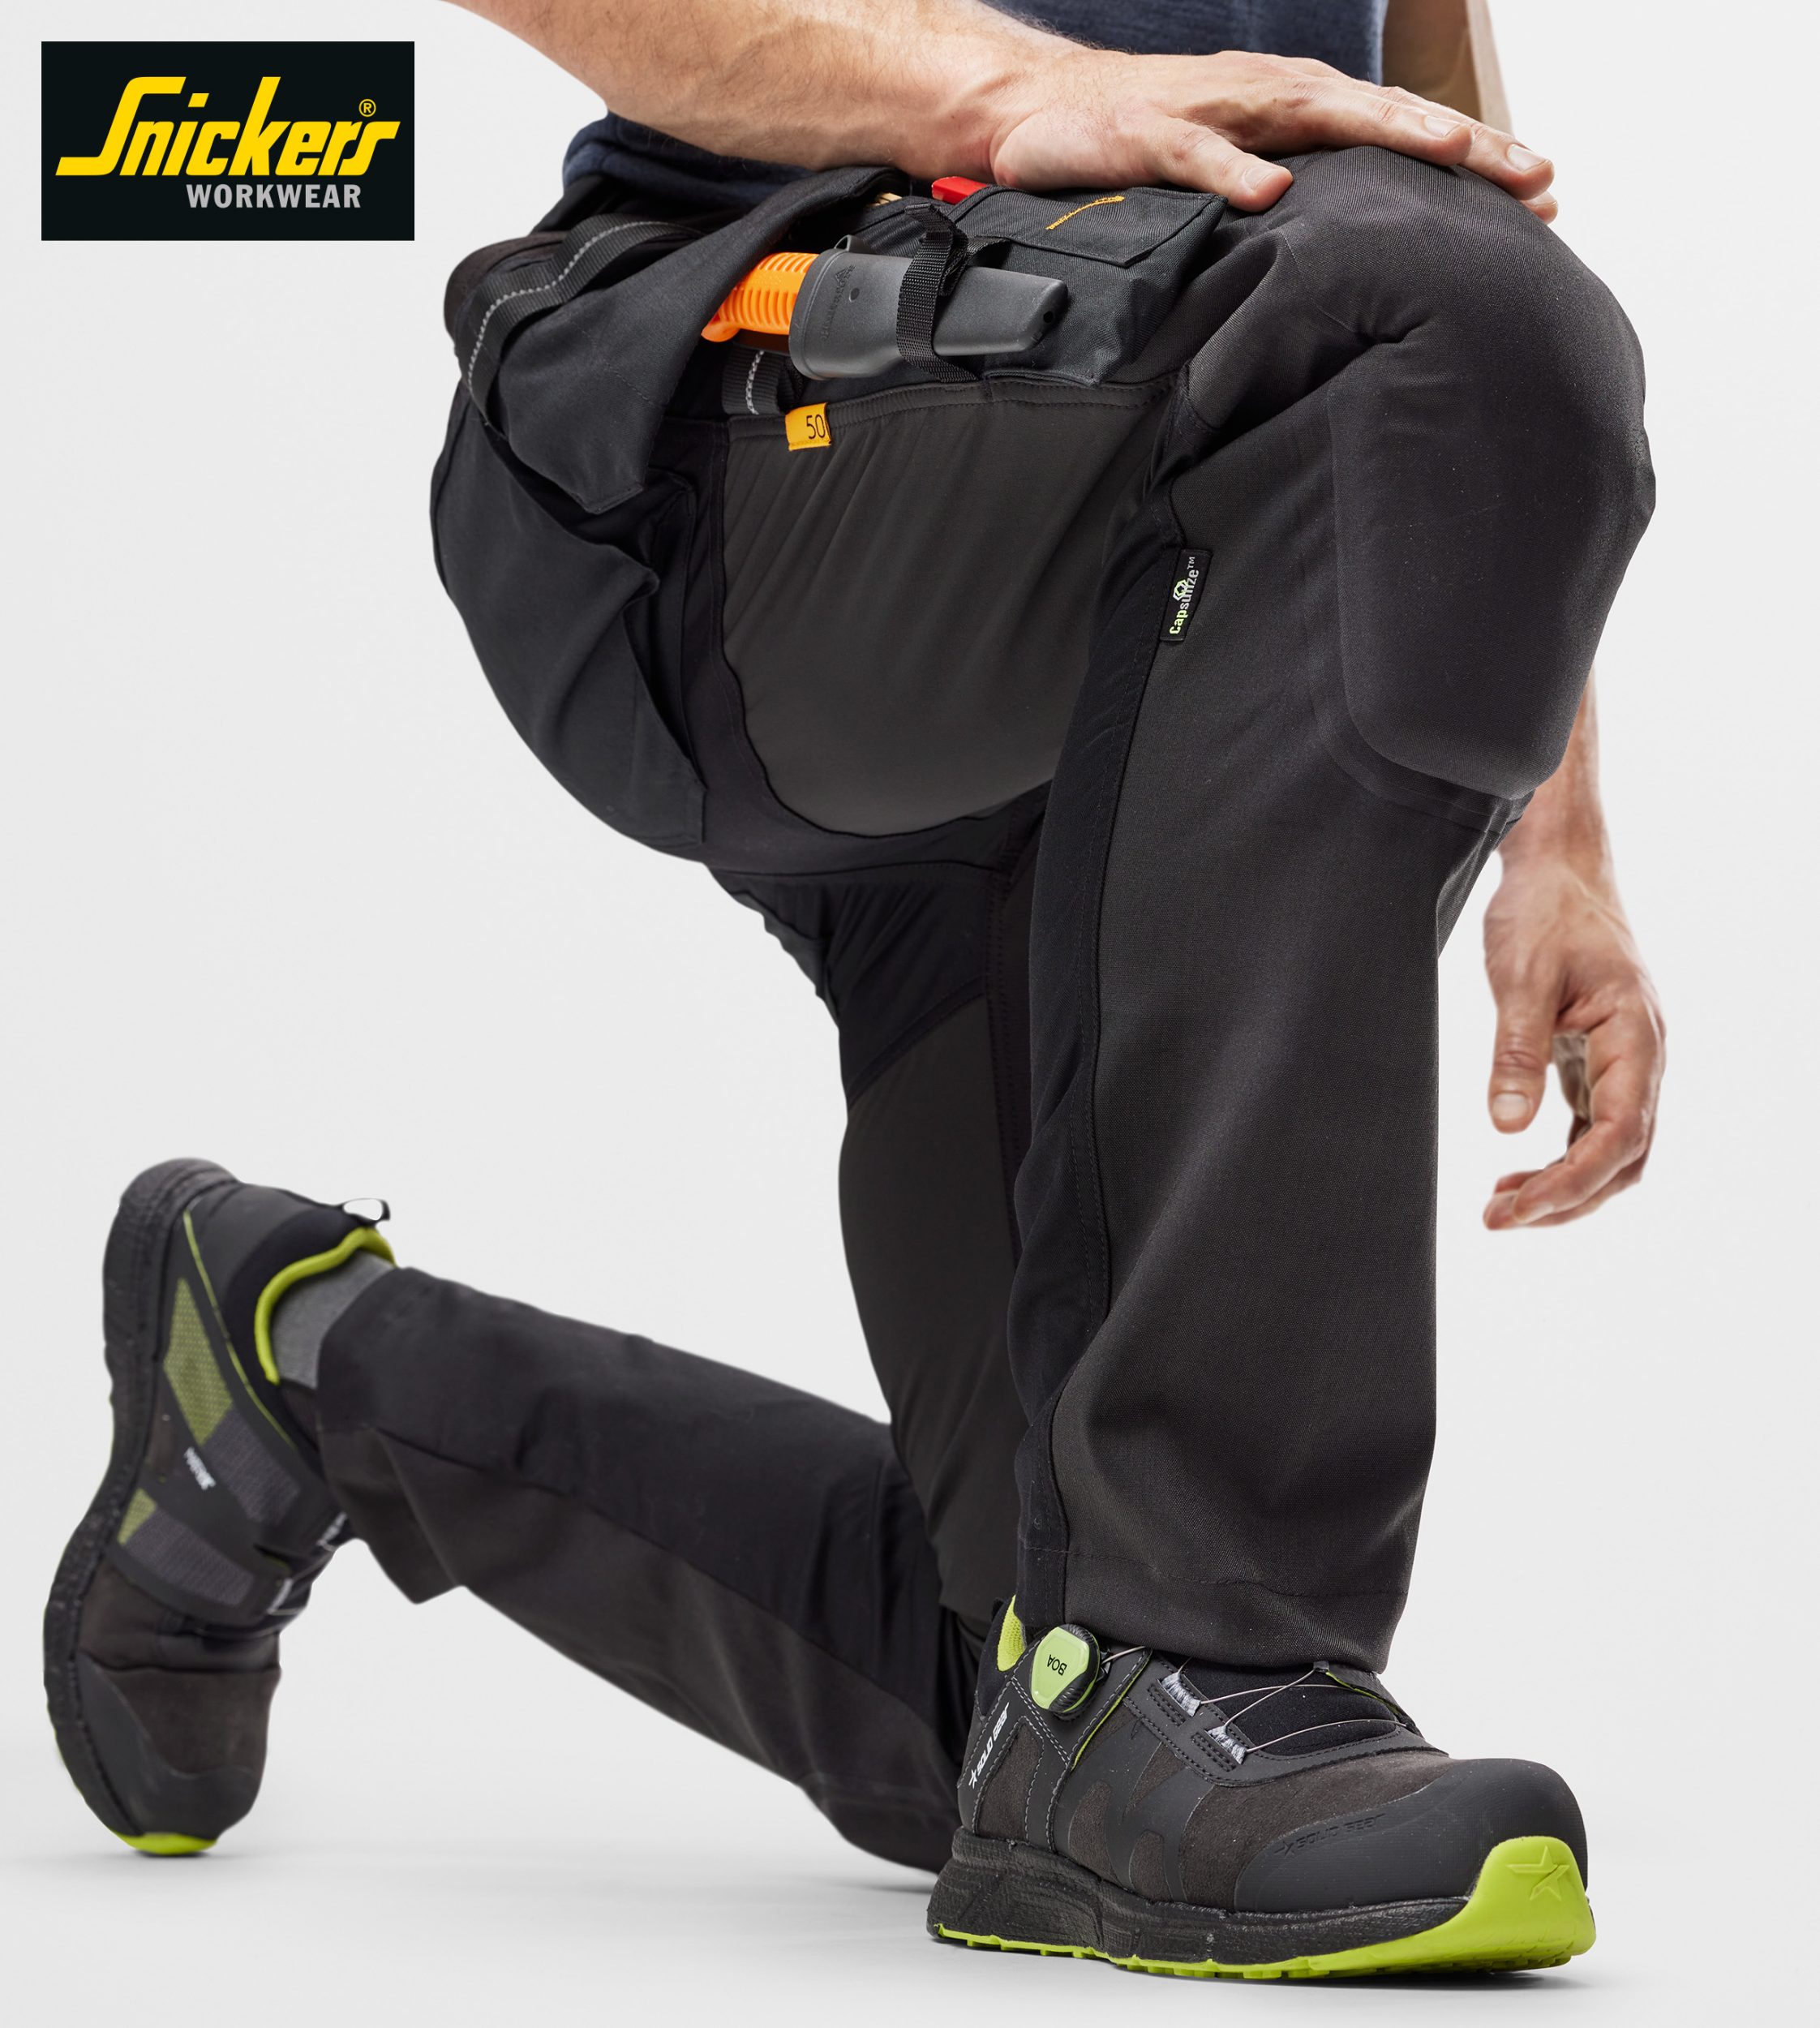 A world’s first – Snickers Workwear’s new integrated kneepad system